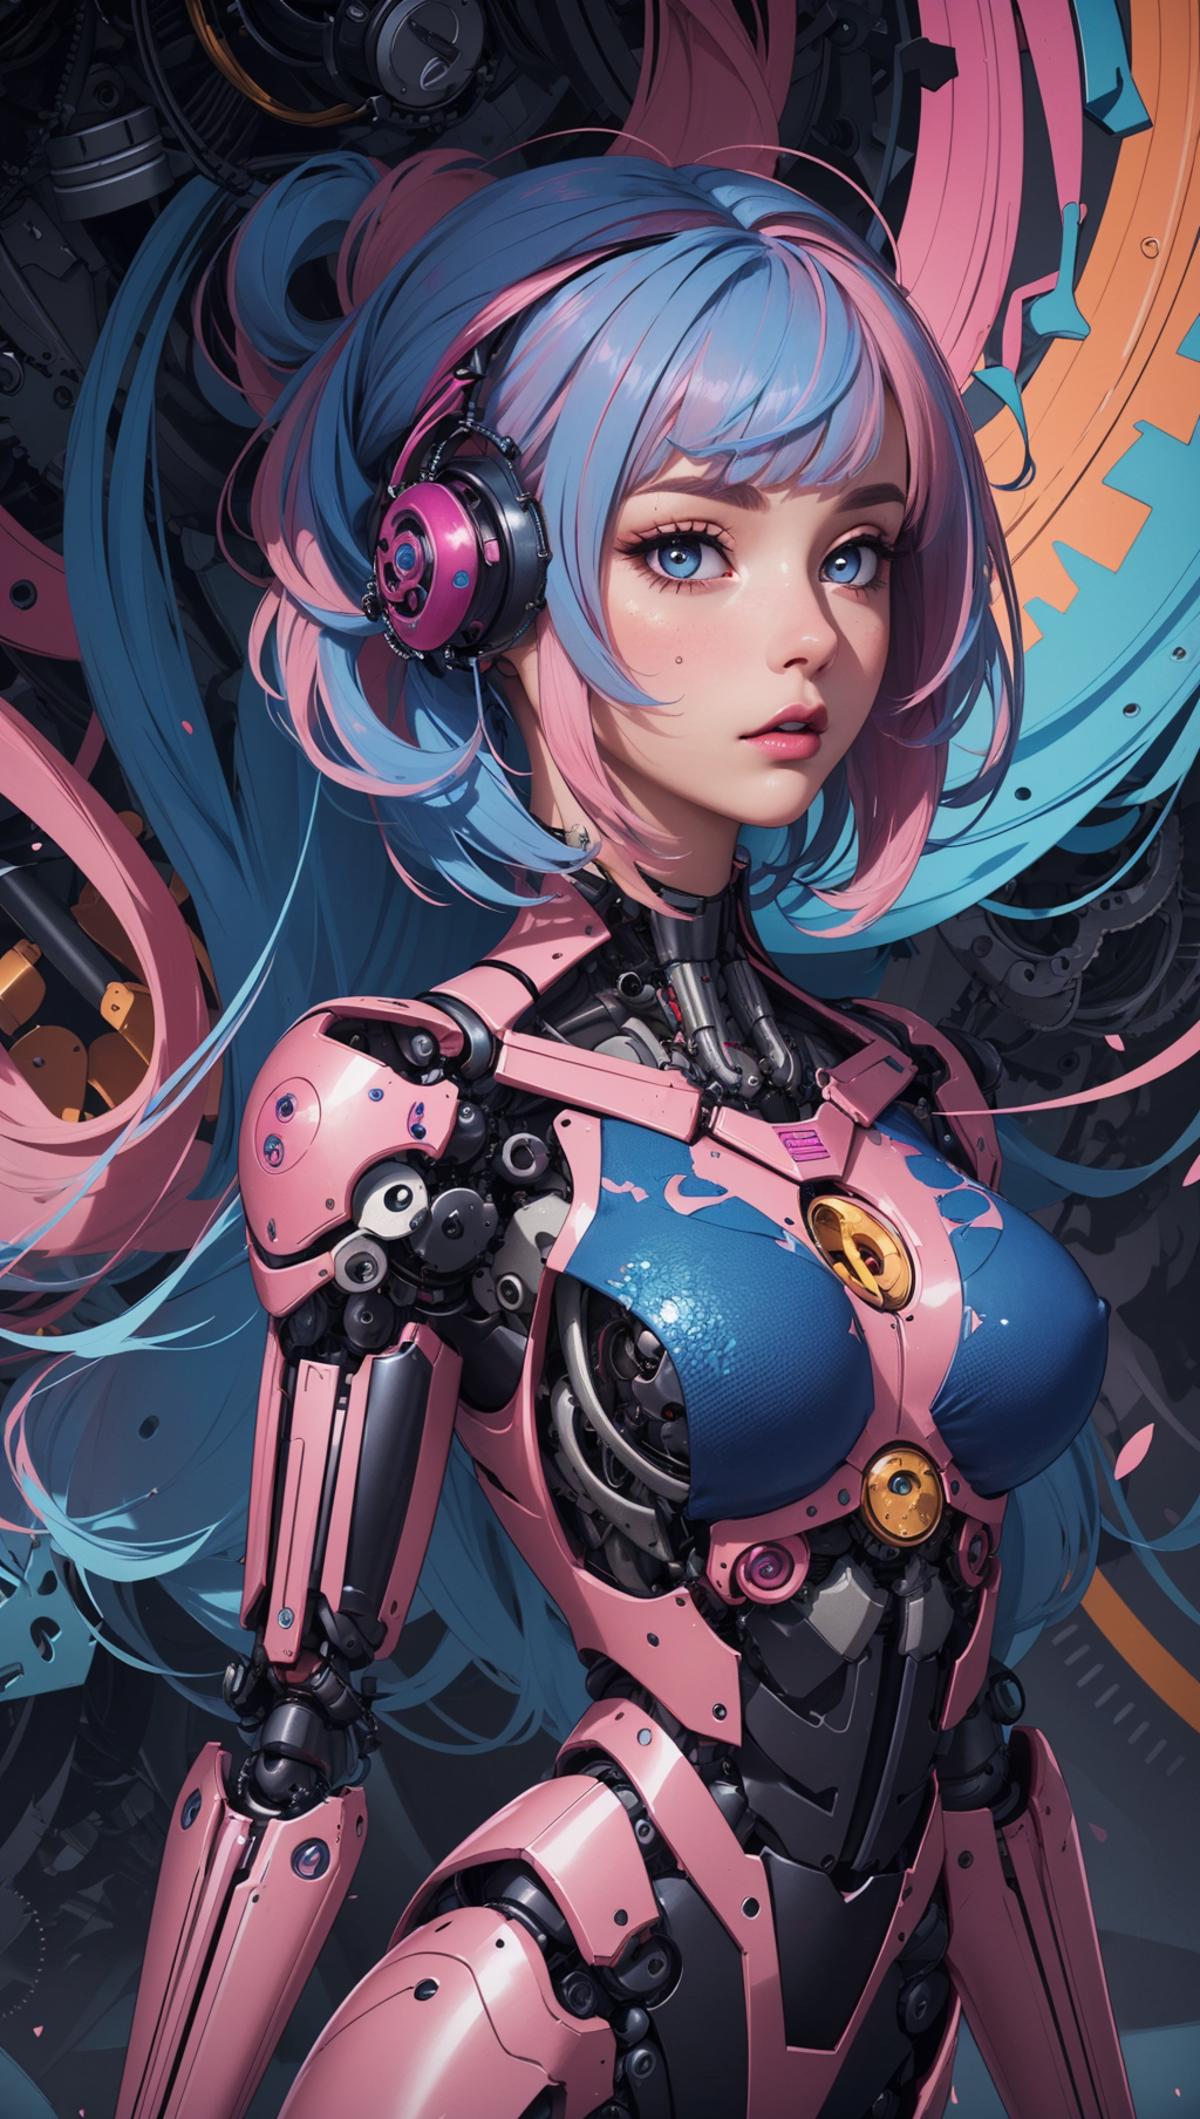 A robotic woman with blue hair and pink skin.